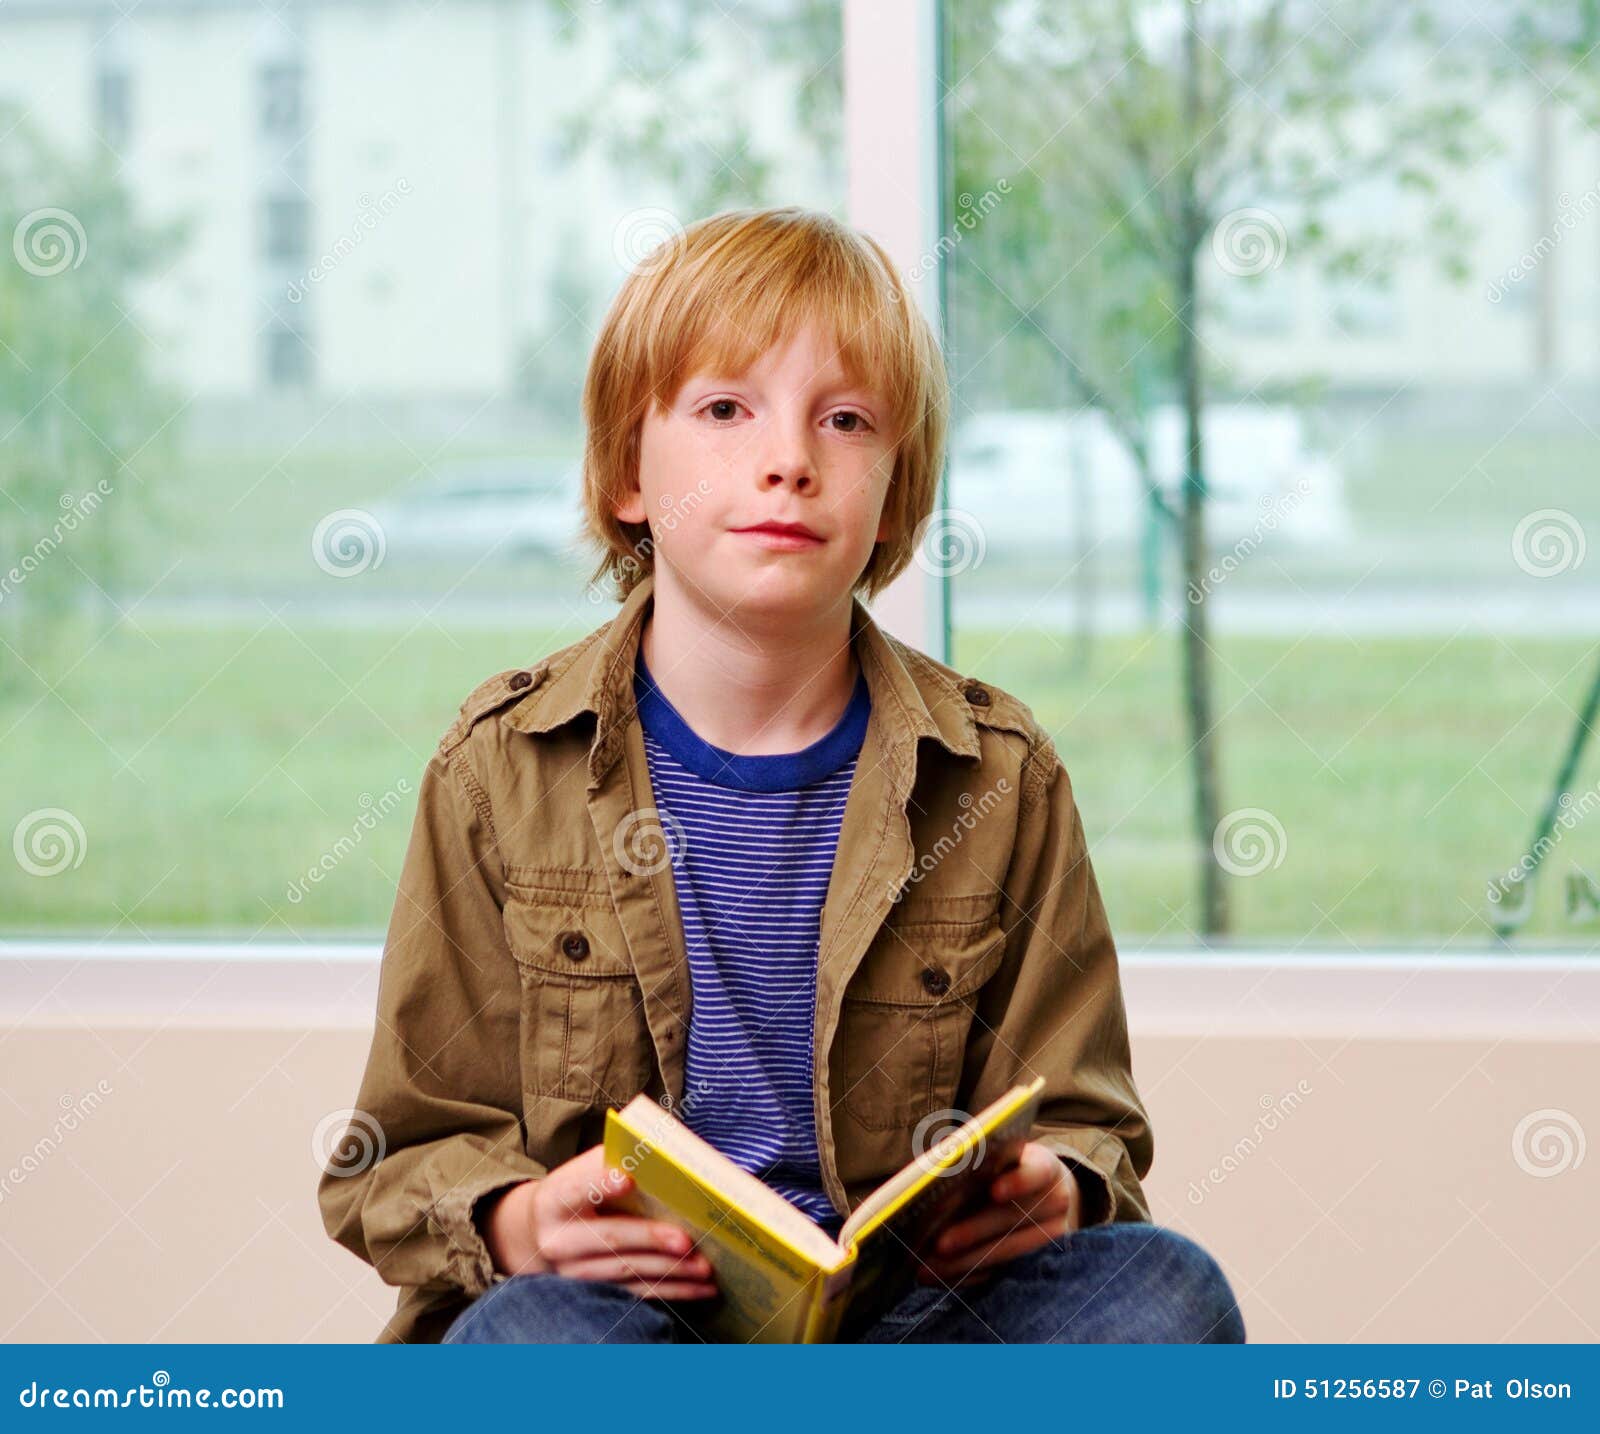 young lad reading book